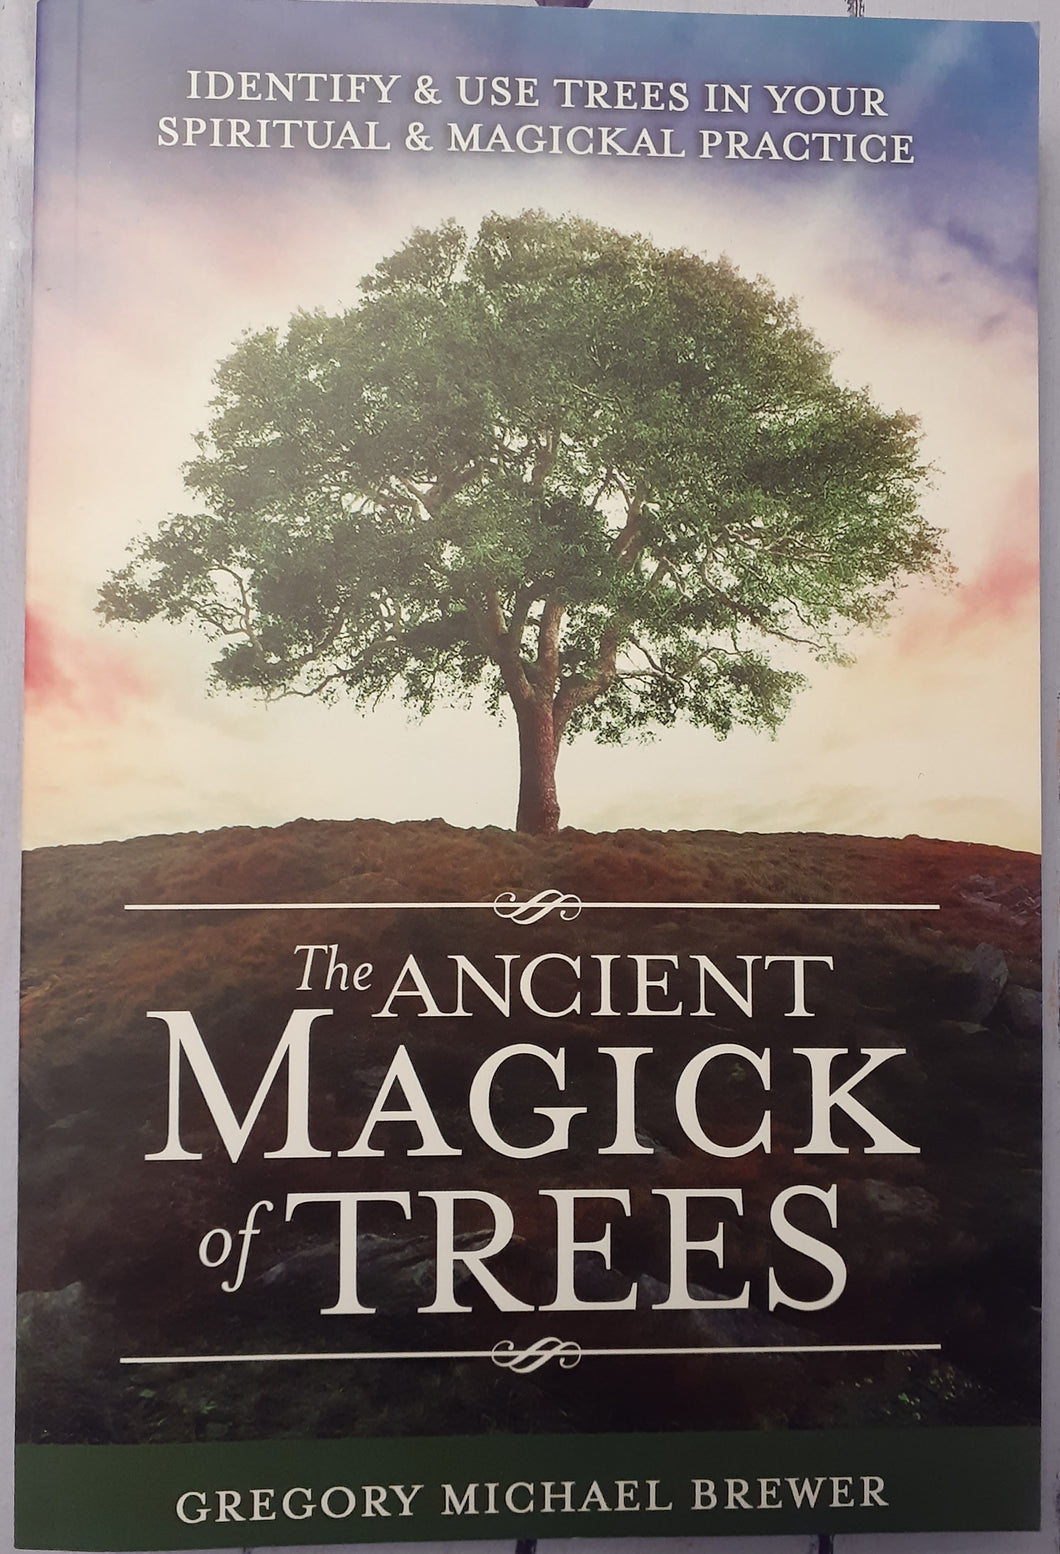 The Ancient Magick of Trees: Identify & Use Trees in Your Spiritual & Magickal Practice